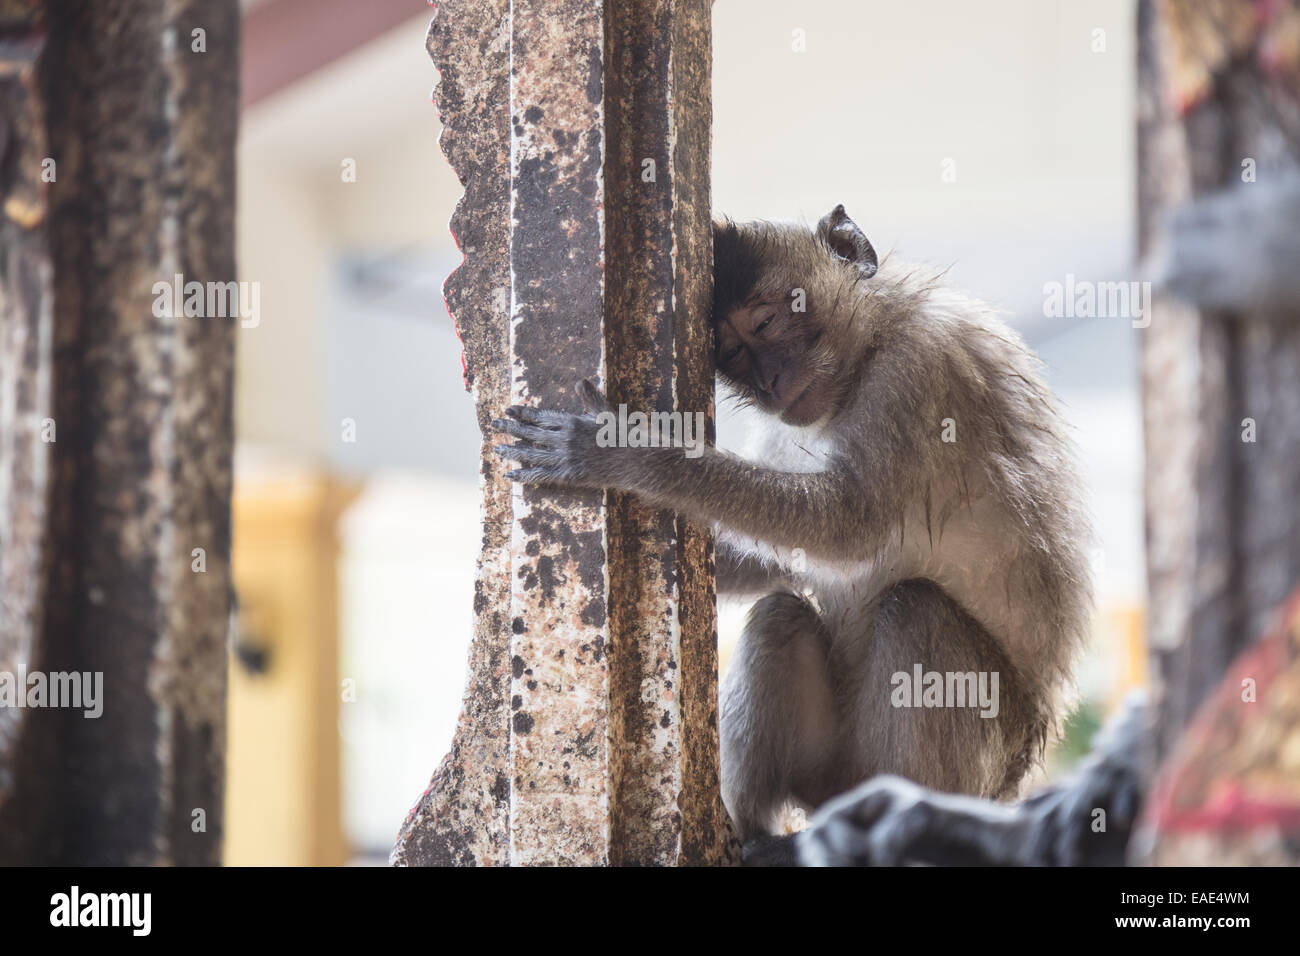 A Macaque monkey is holding a piece of statue during the high noon heat in south Thailand by Tiger cave temple Stock Photo